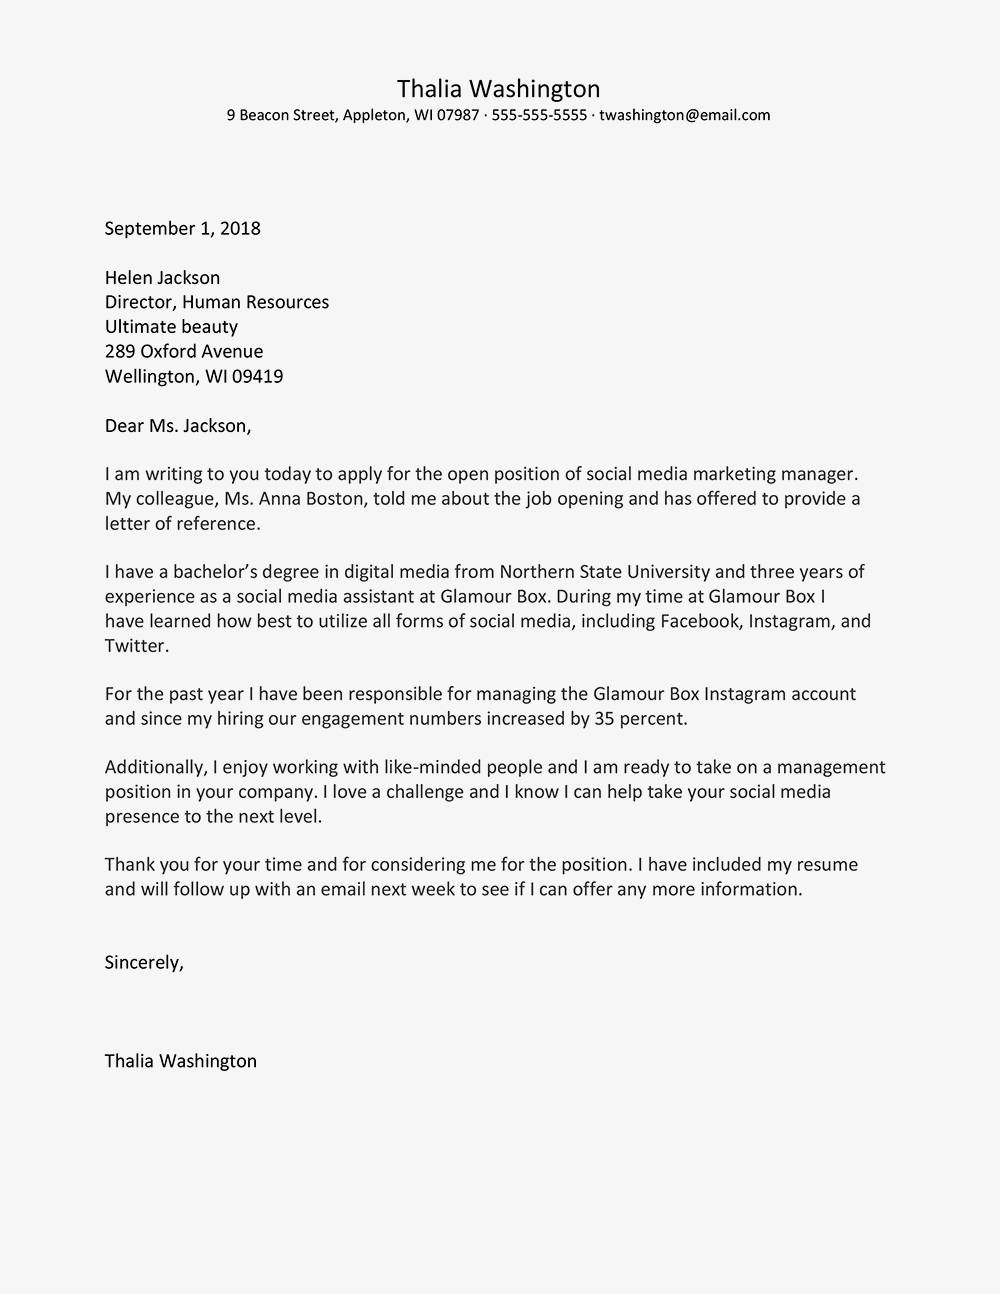 Cover Letter Format Template Cover Letter Template To Use To Apply For A Job